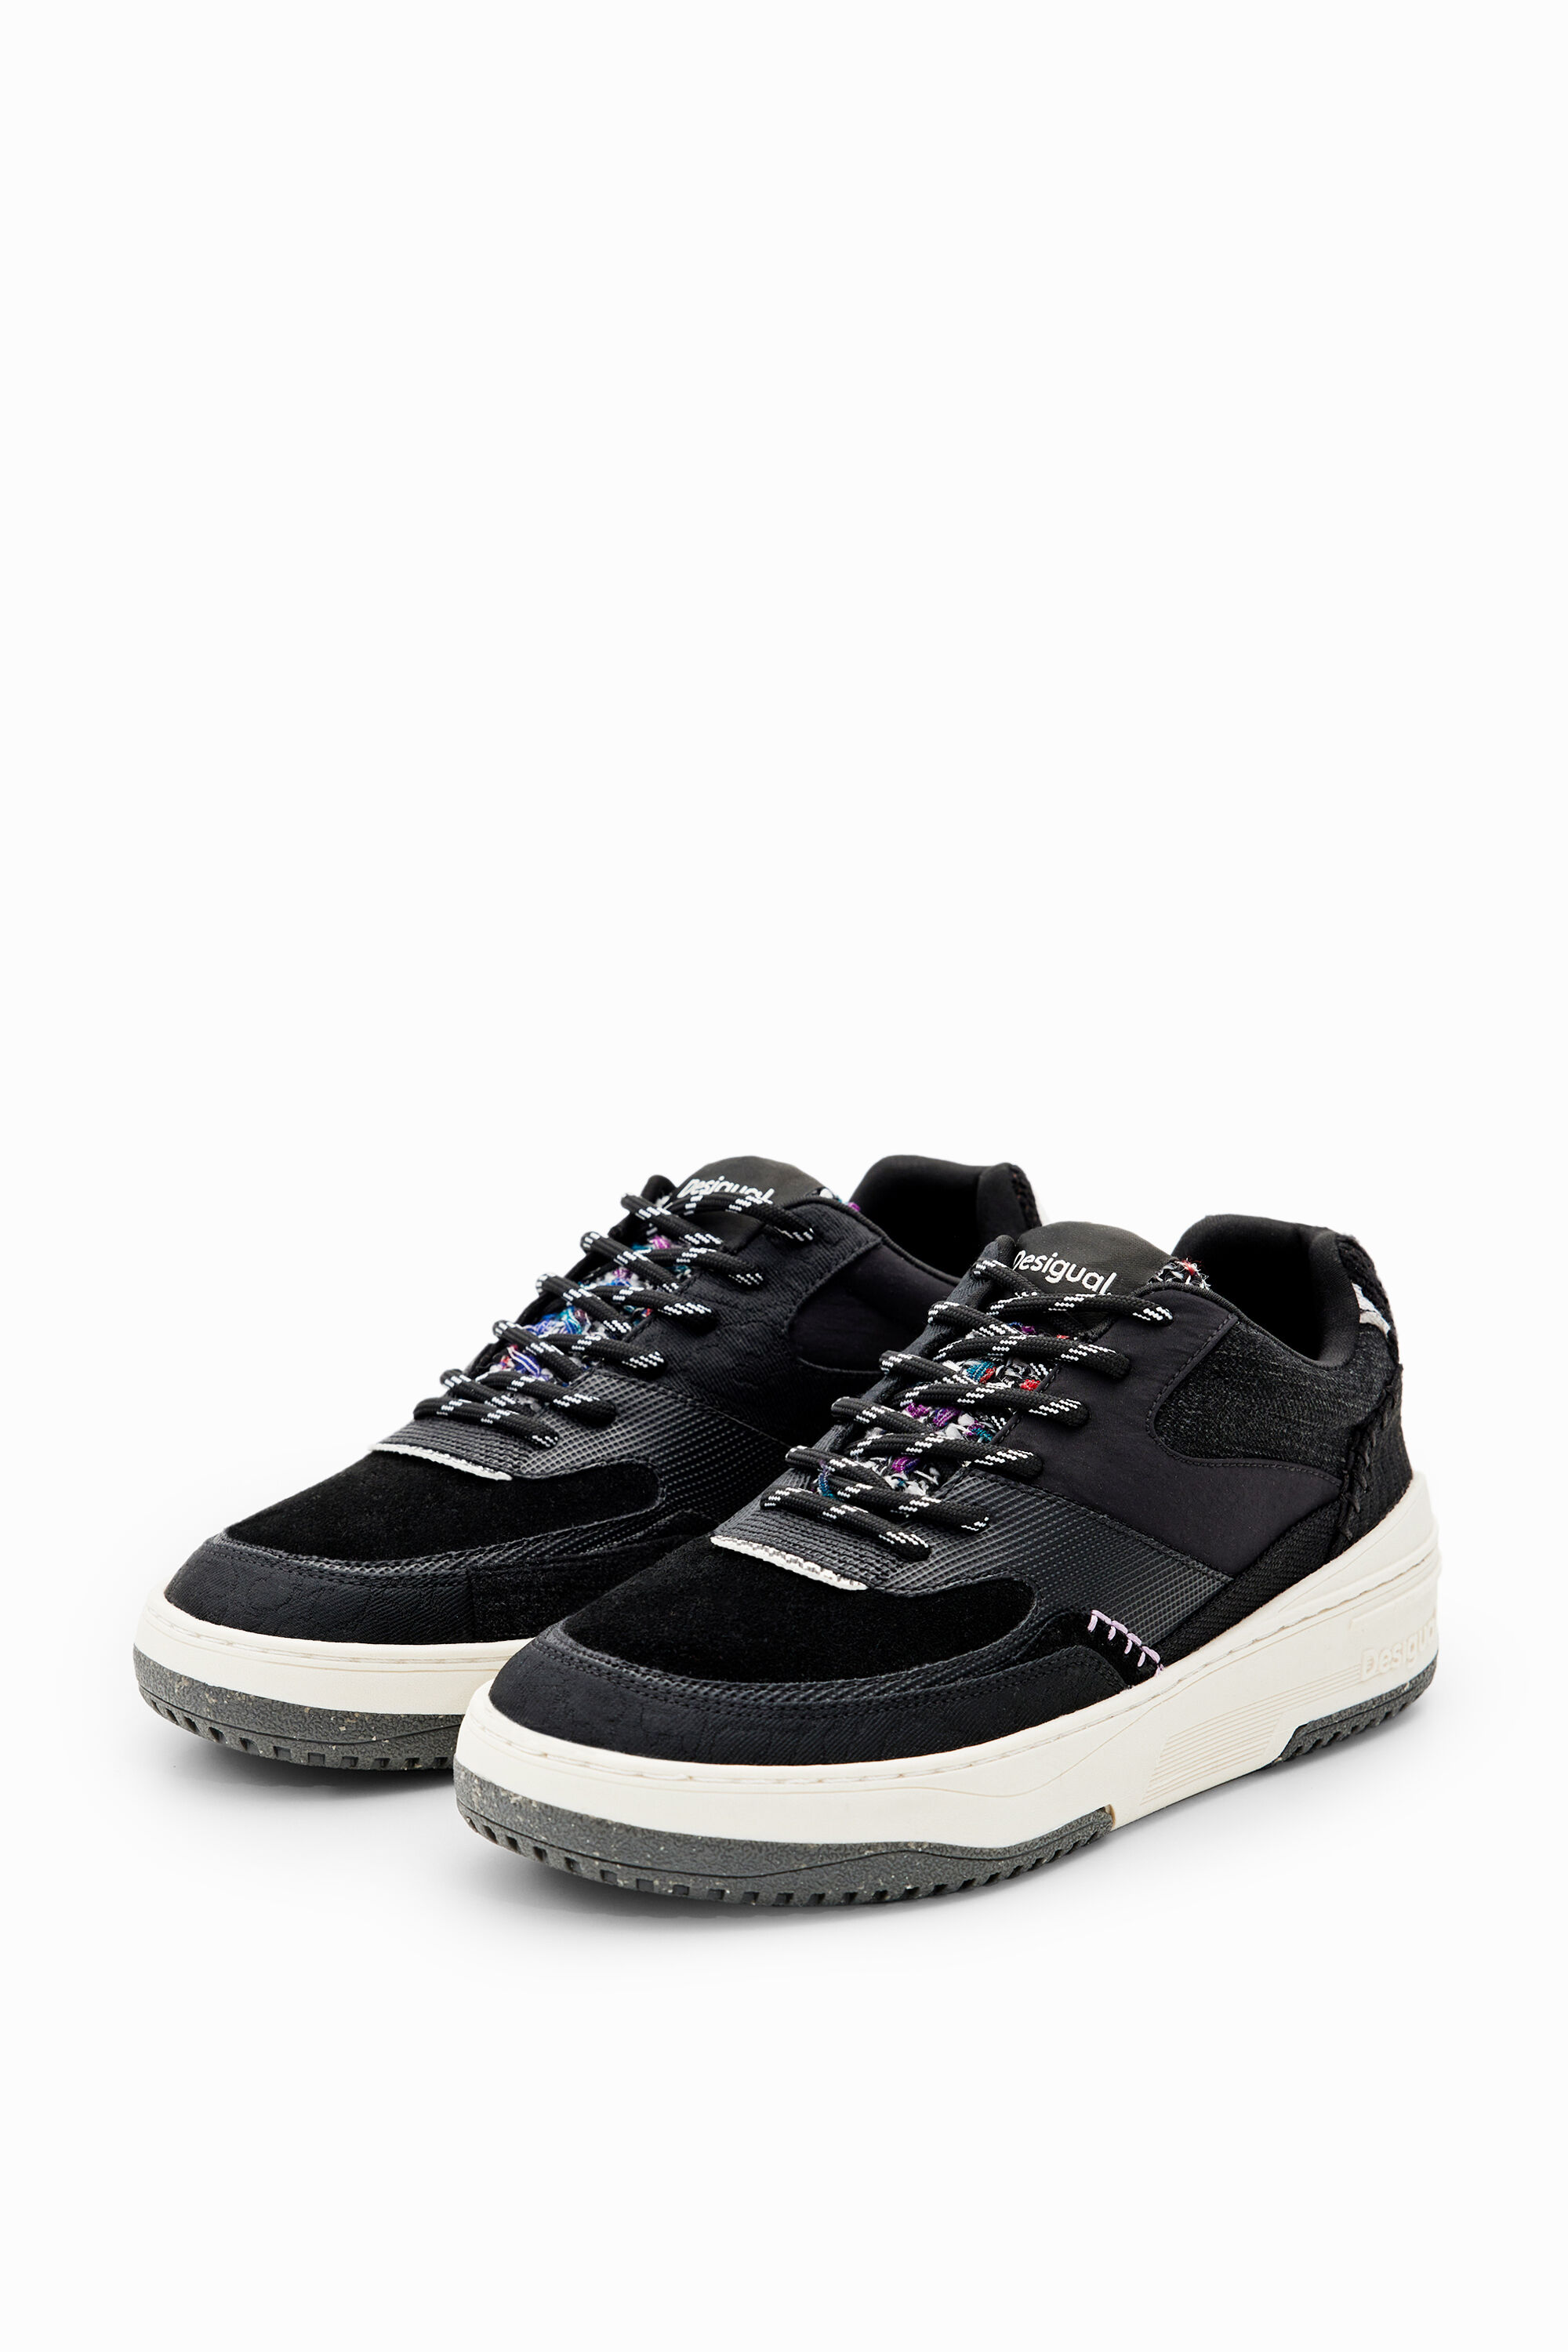 Retro chunky patchwork sneakers - BLACK - 39